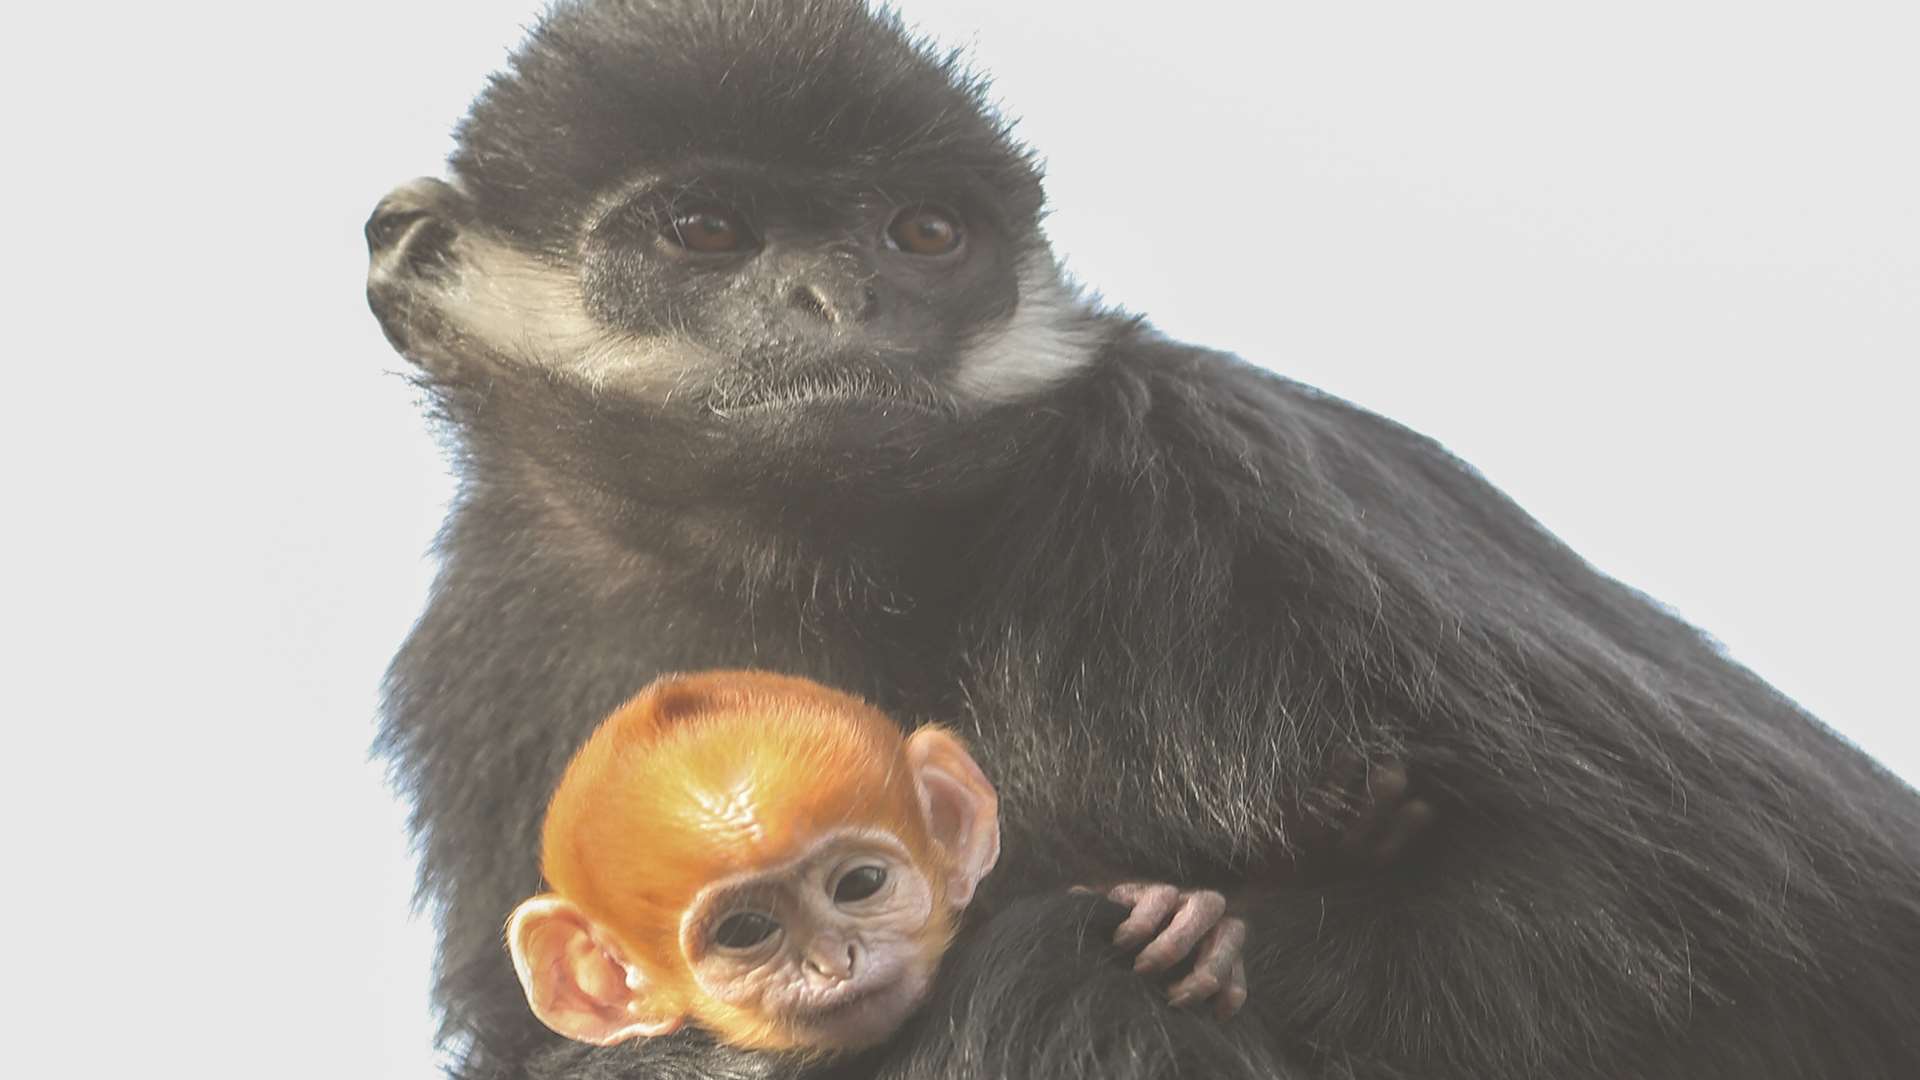 A baby Francois langur is making its debut at Howletts wild animal park